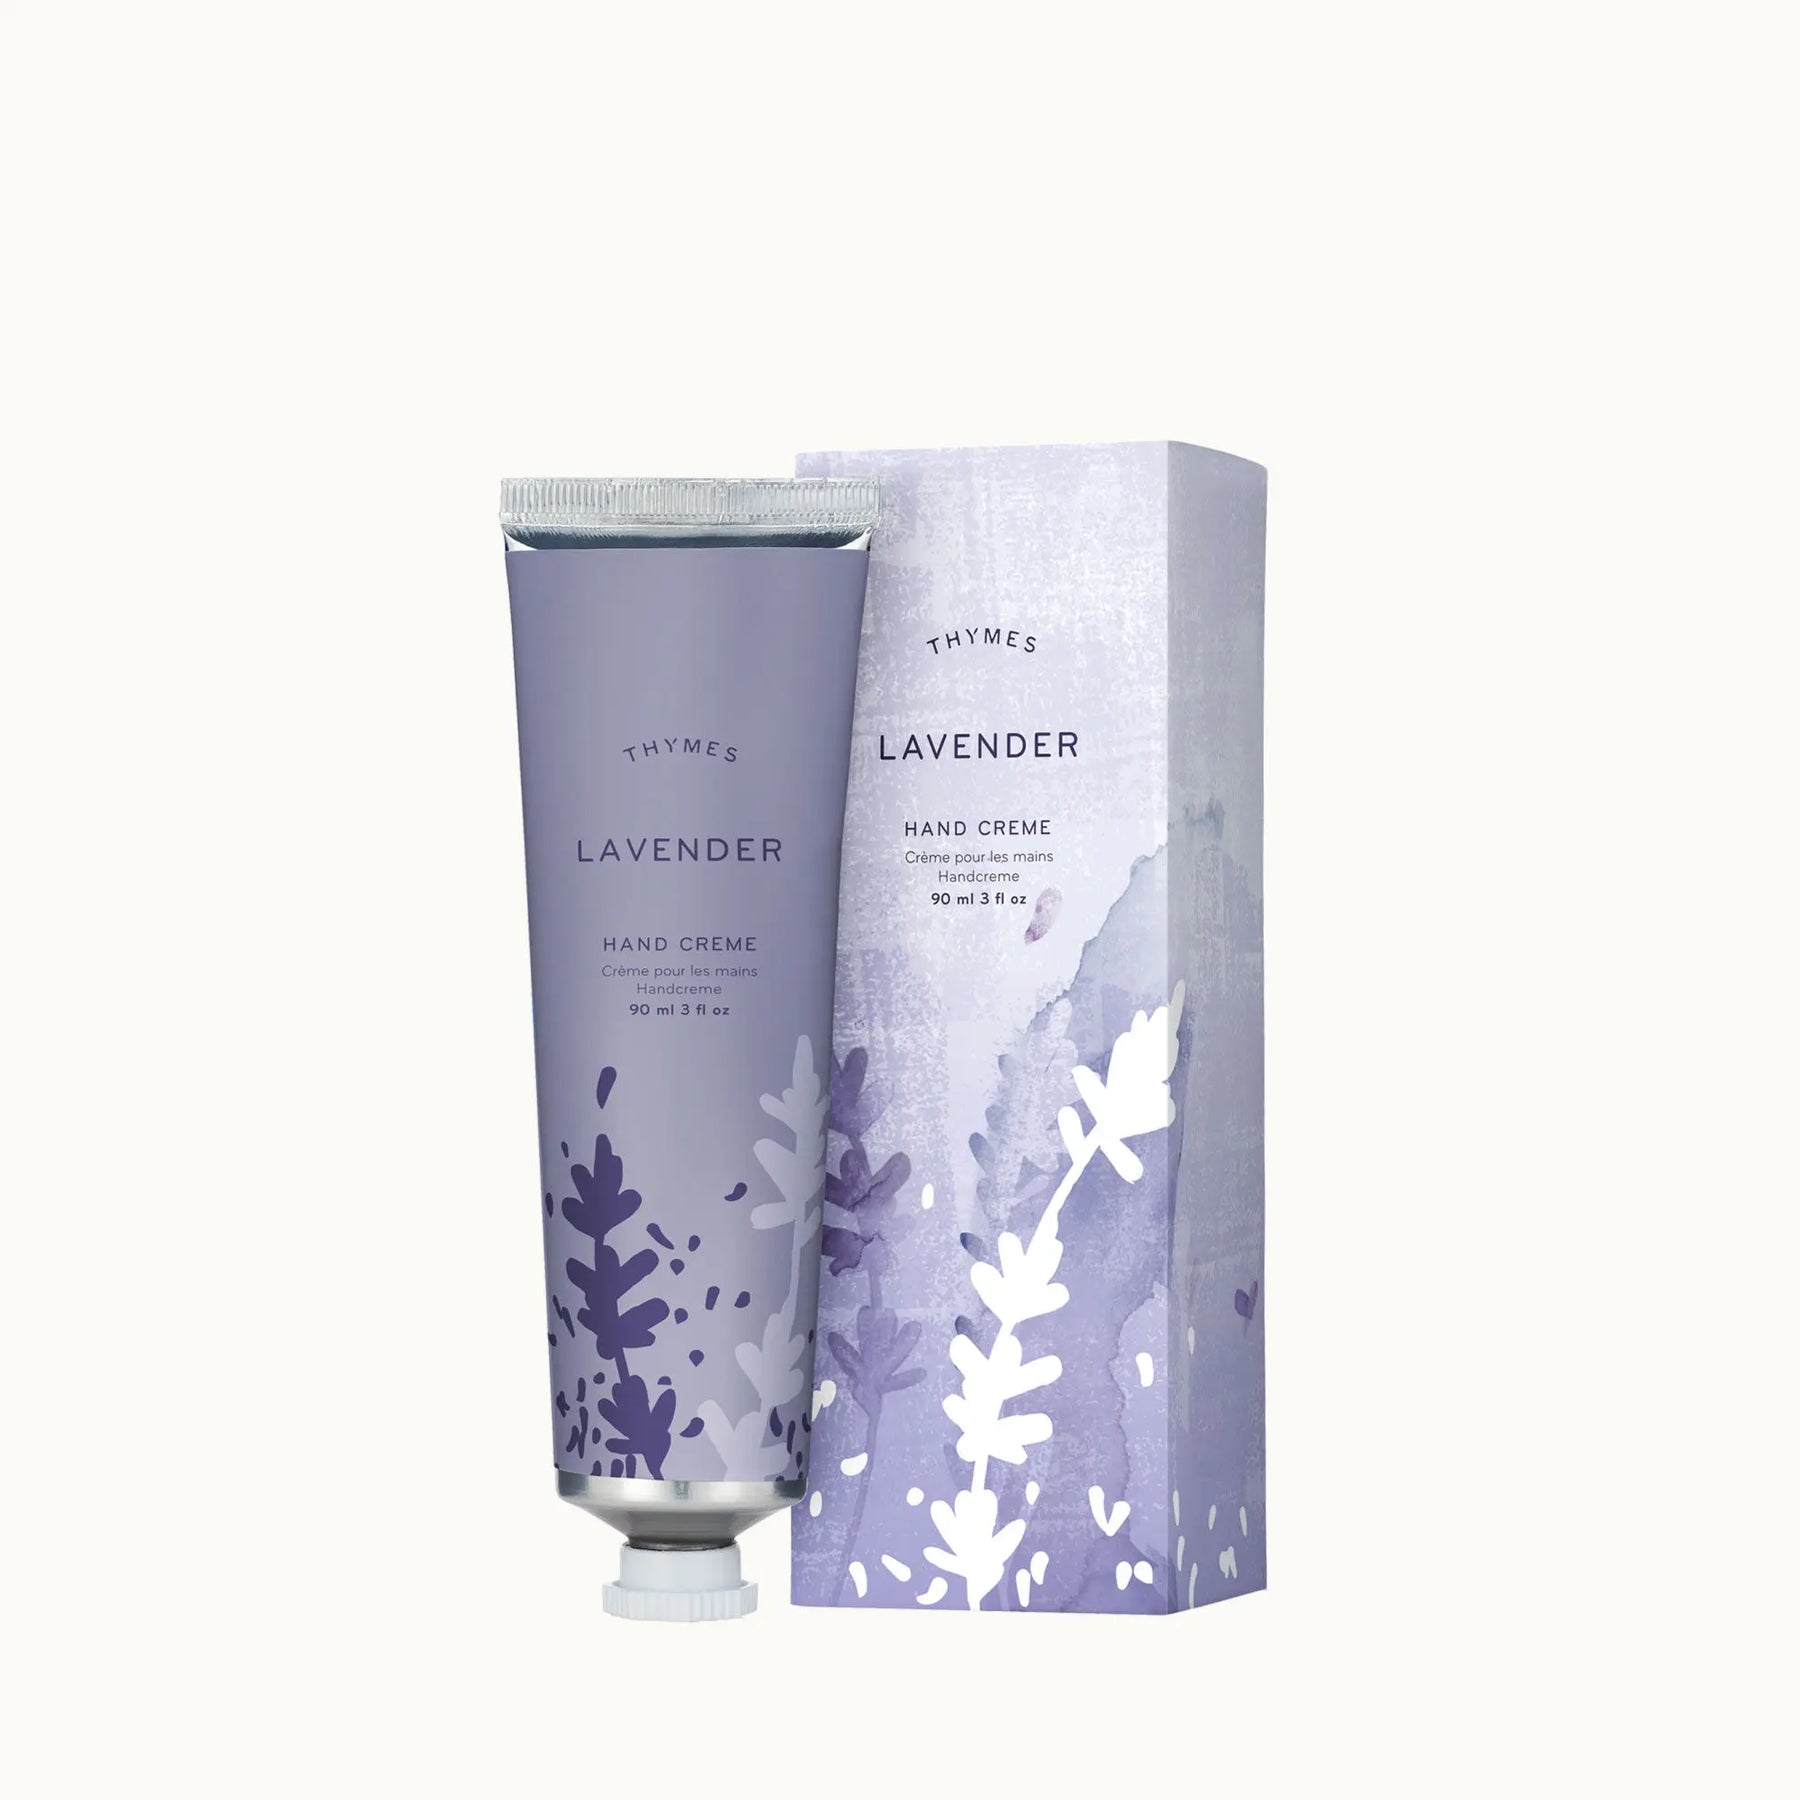 Thymes Lavender Hand Cream 90 milliliter 3 fluid ounce